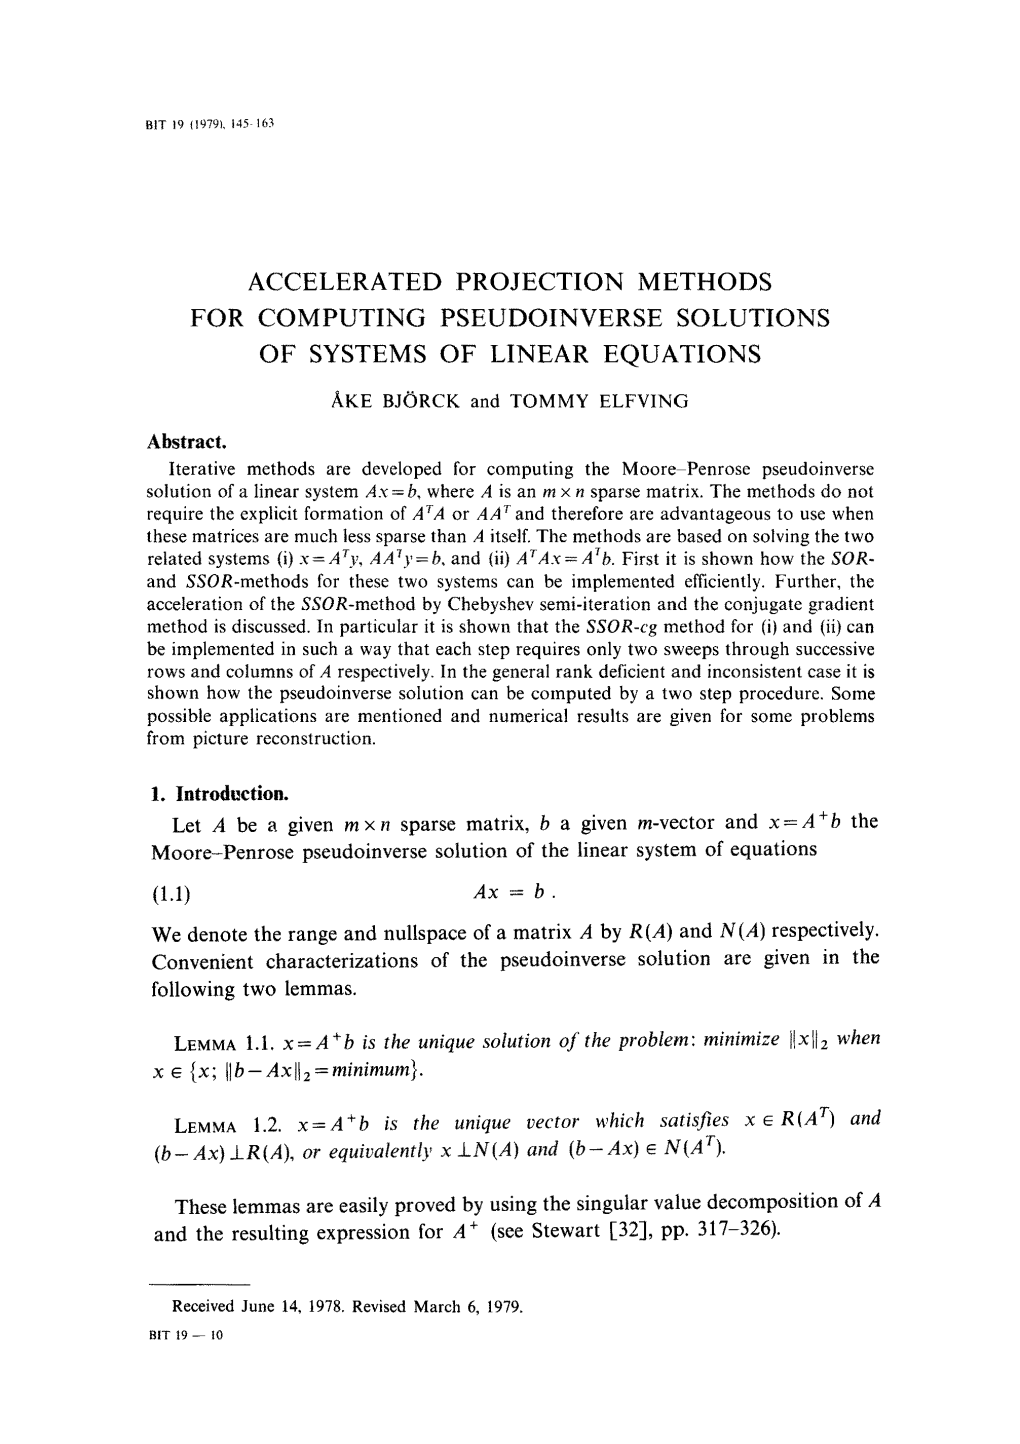 Accelerated Projection Methods for Computing Pseudoinverse Solutions of Systems of Linear Equations